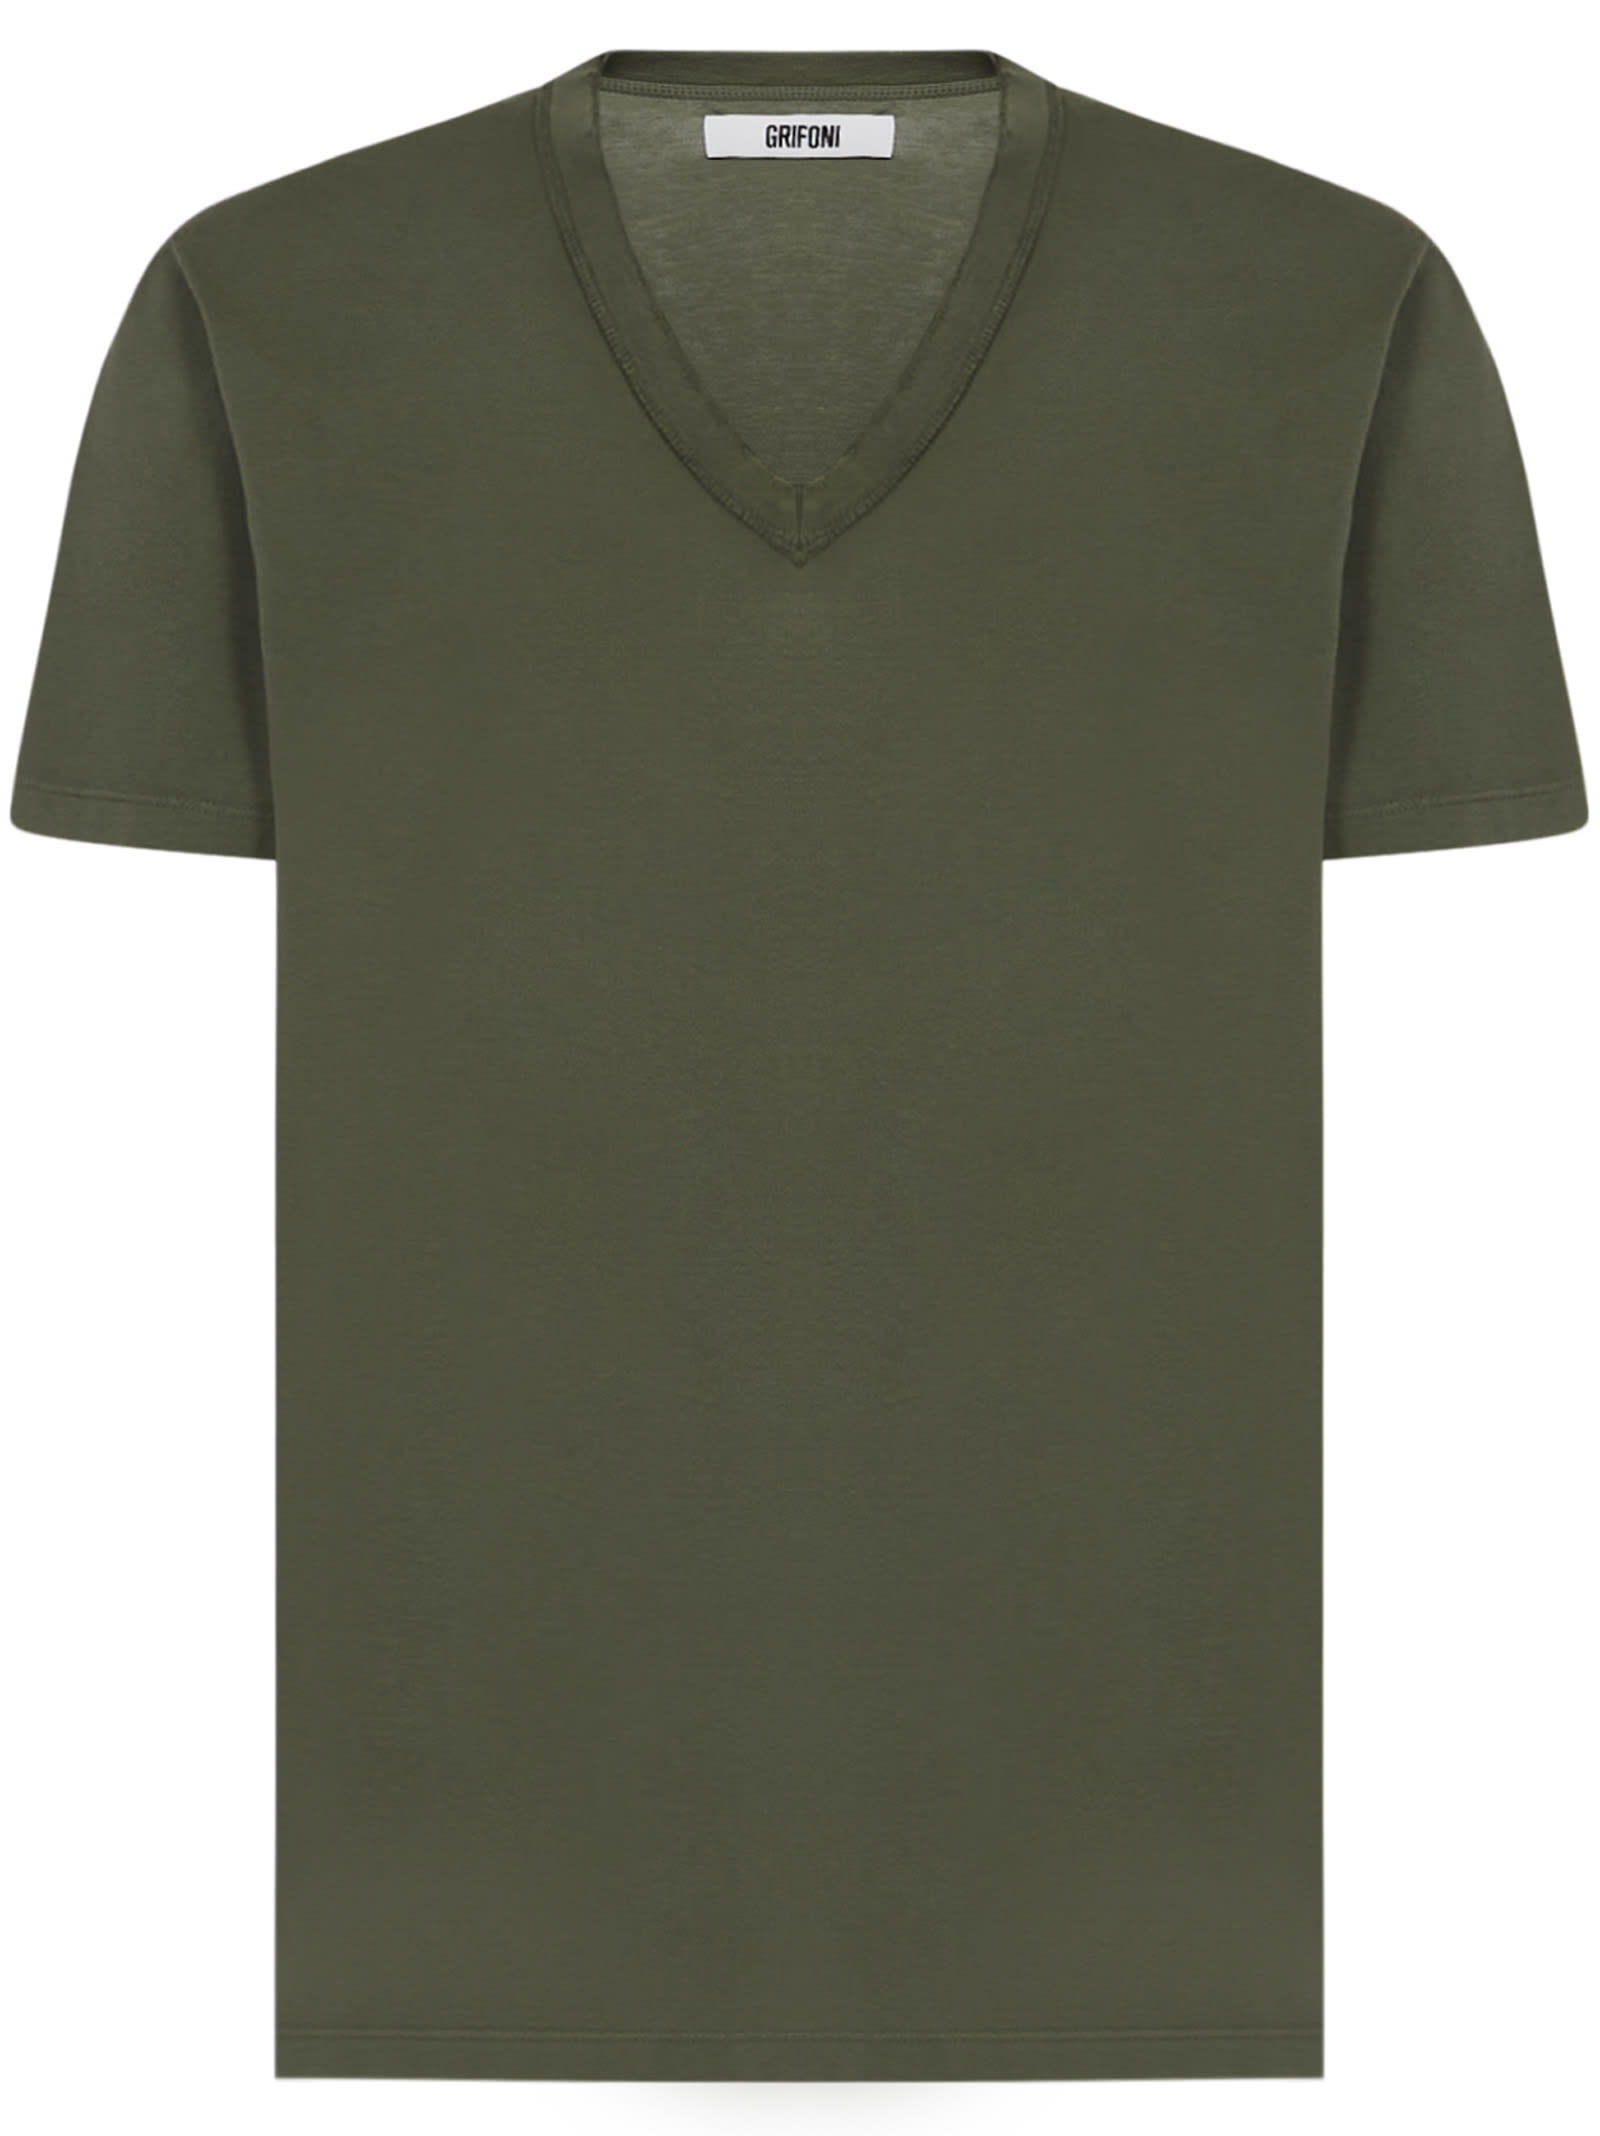 Mauro Grifoni Grifoni T-shirt In Military Green